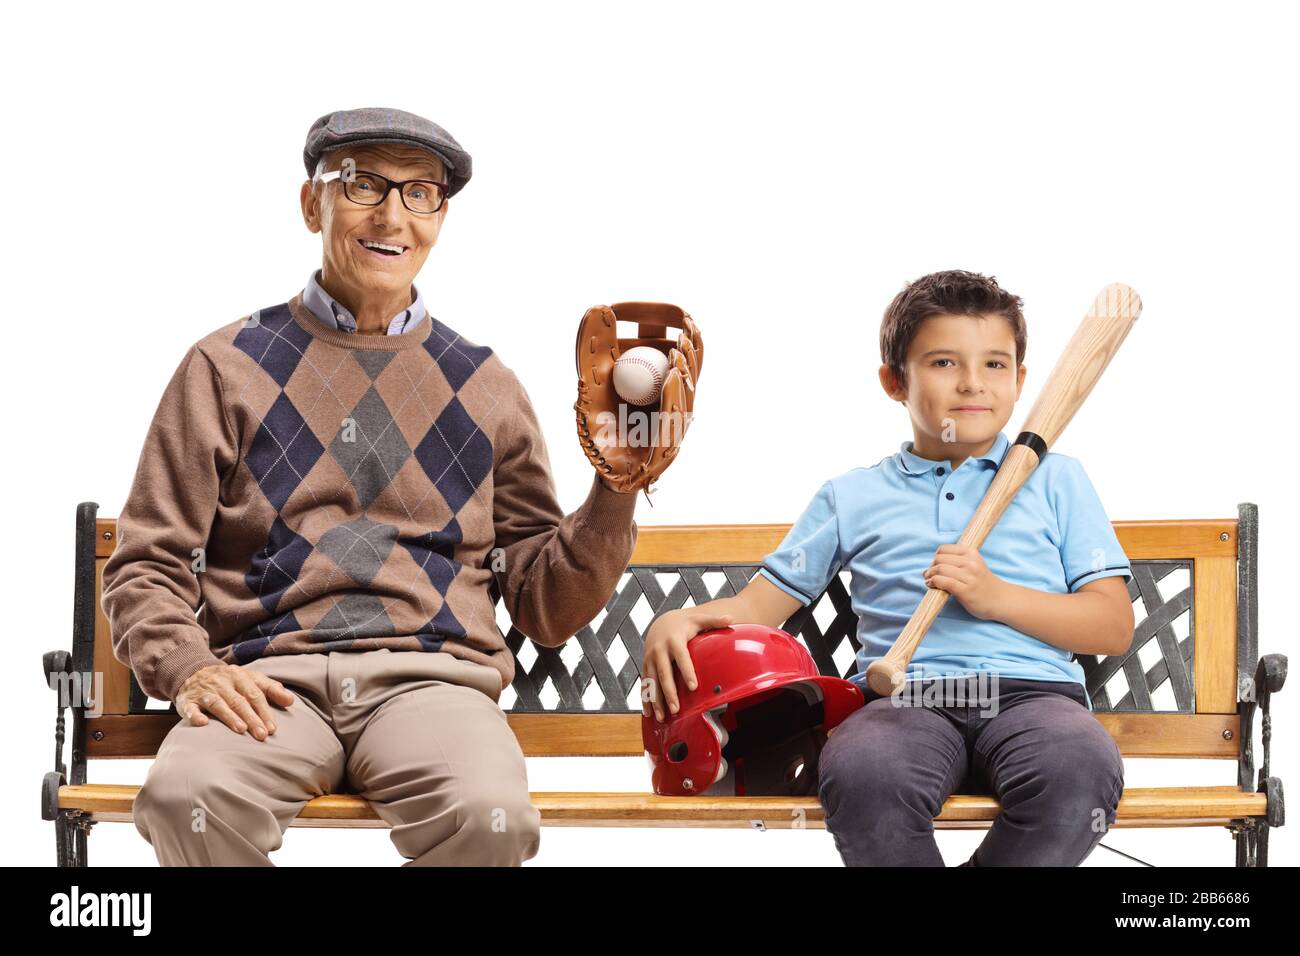 Grandson and grandfather sitting on a bench with a baseball equipment isolated on white background Stock Photo